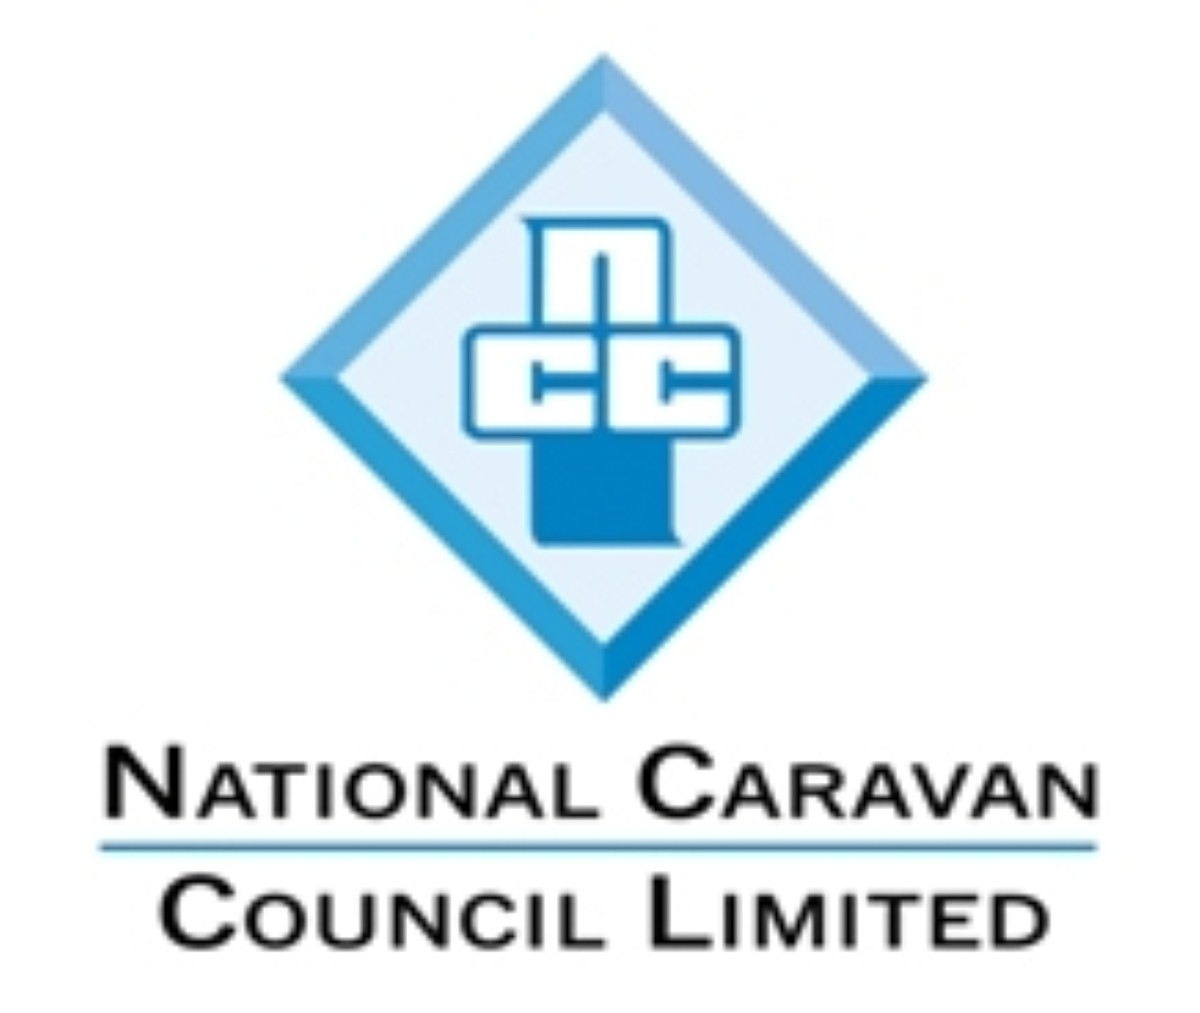 The NCC is the trade association for the caravan industry